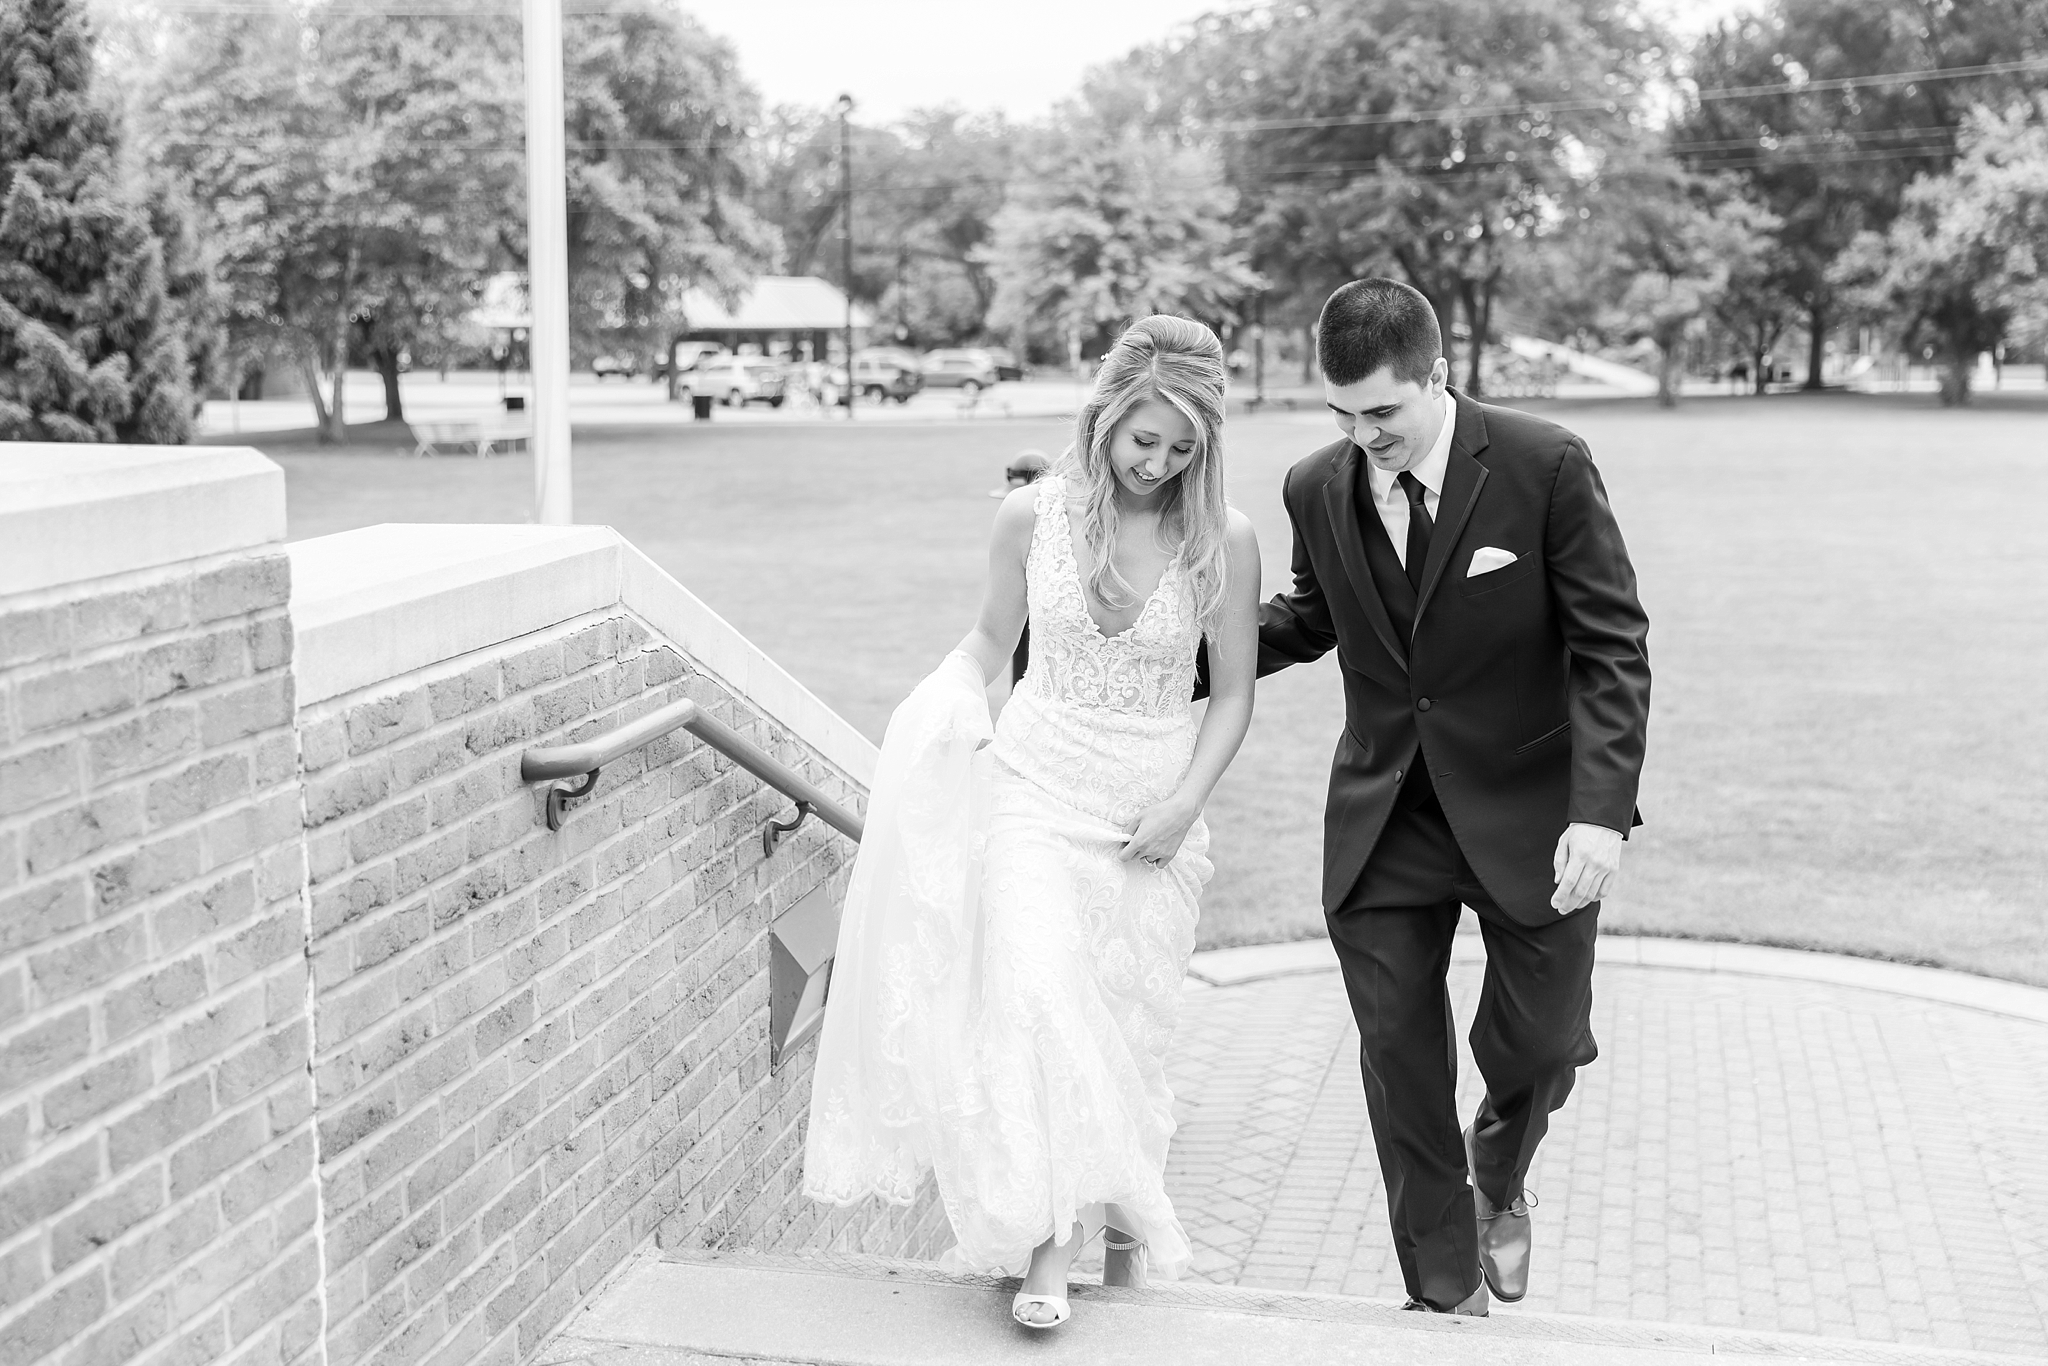 candid-romantic-wedding-photos-at-the-h-hotel-in-midland-michigan-by-courtney-carolyn-photography_0035.jpg